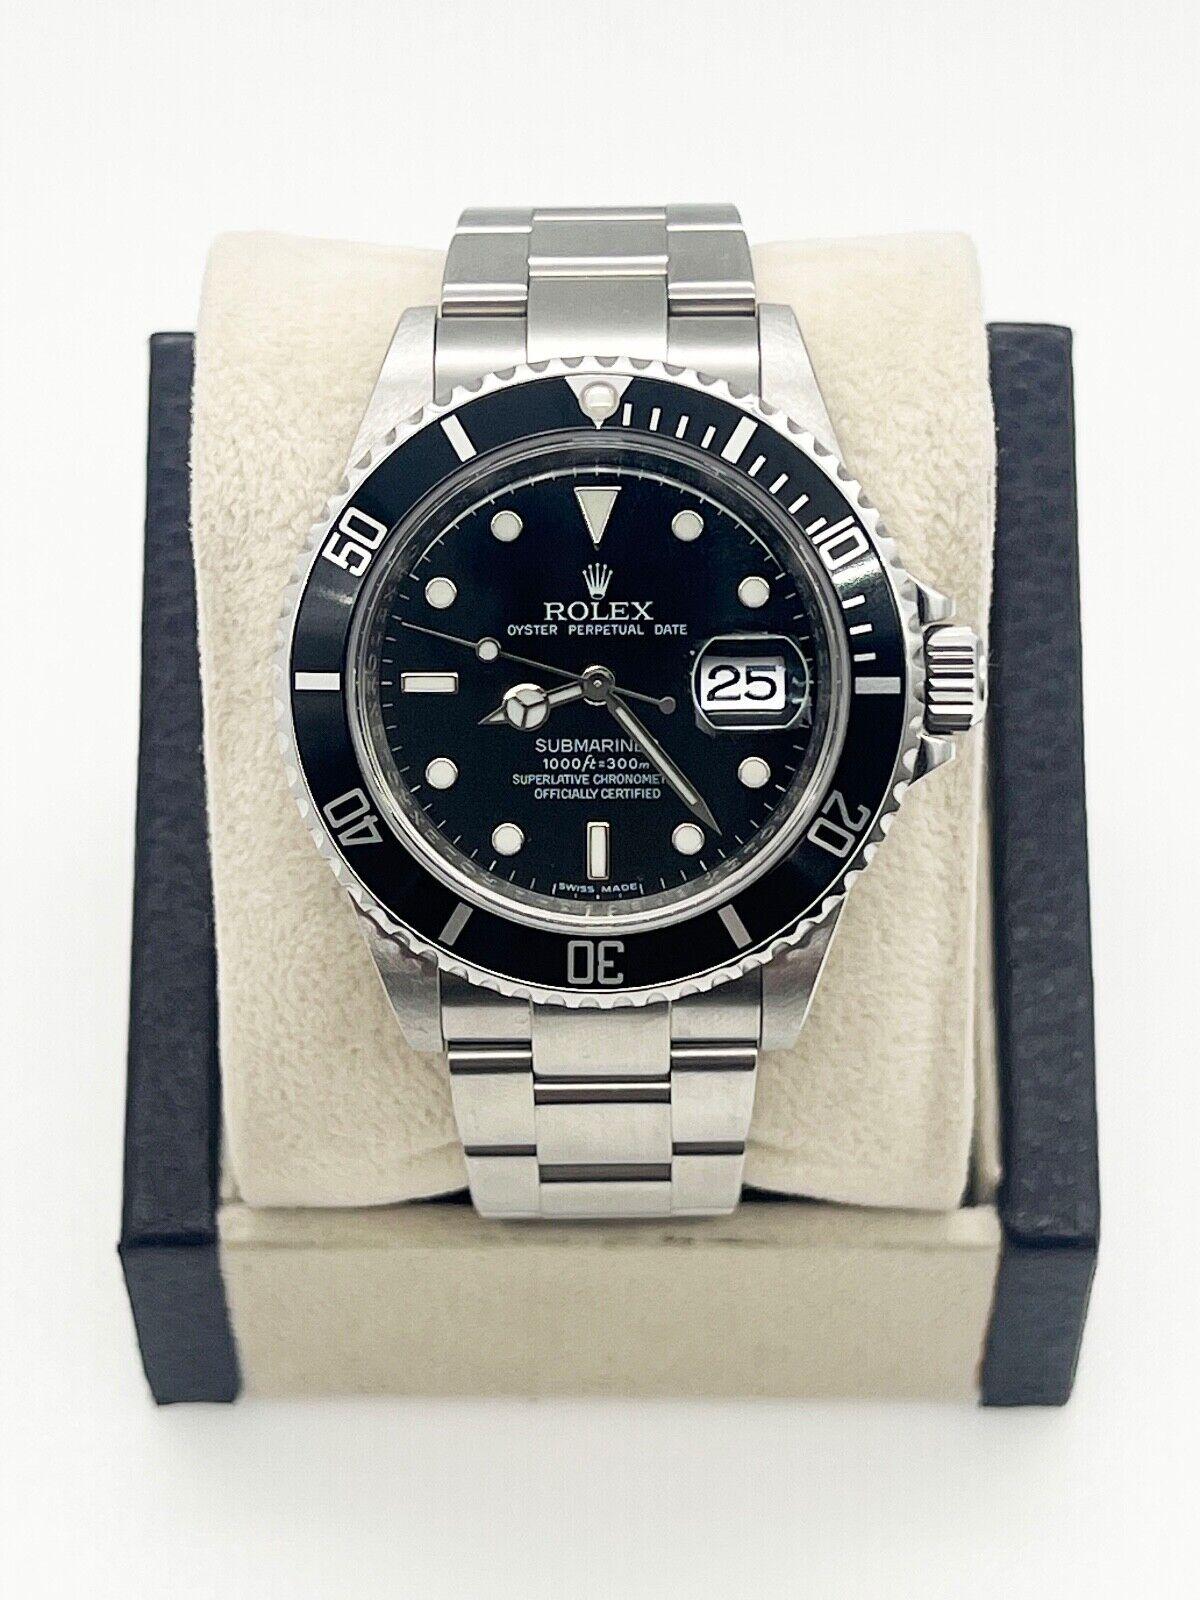 Style Number: 16610

Serial: SR806*** - SCRAMBLED SERIAL 

Year: 2010
 
Model: Submariner 
 
Case Material: Stainless Steel 
 
Band: Stainless Steel 
 
Bezel: Black Bezel 
 
Dial: Black 
 
Face: Sapphire Crystal 
 
Case Size: 40mm 
 
Includes: